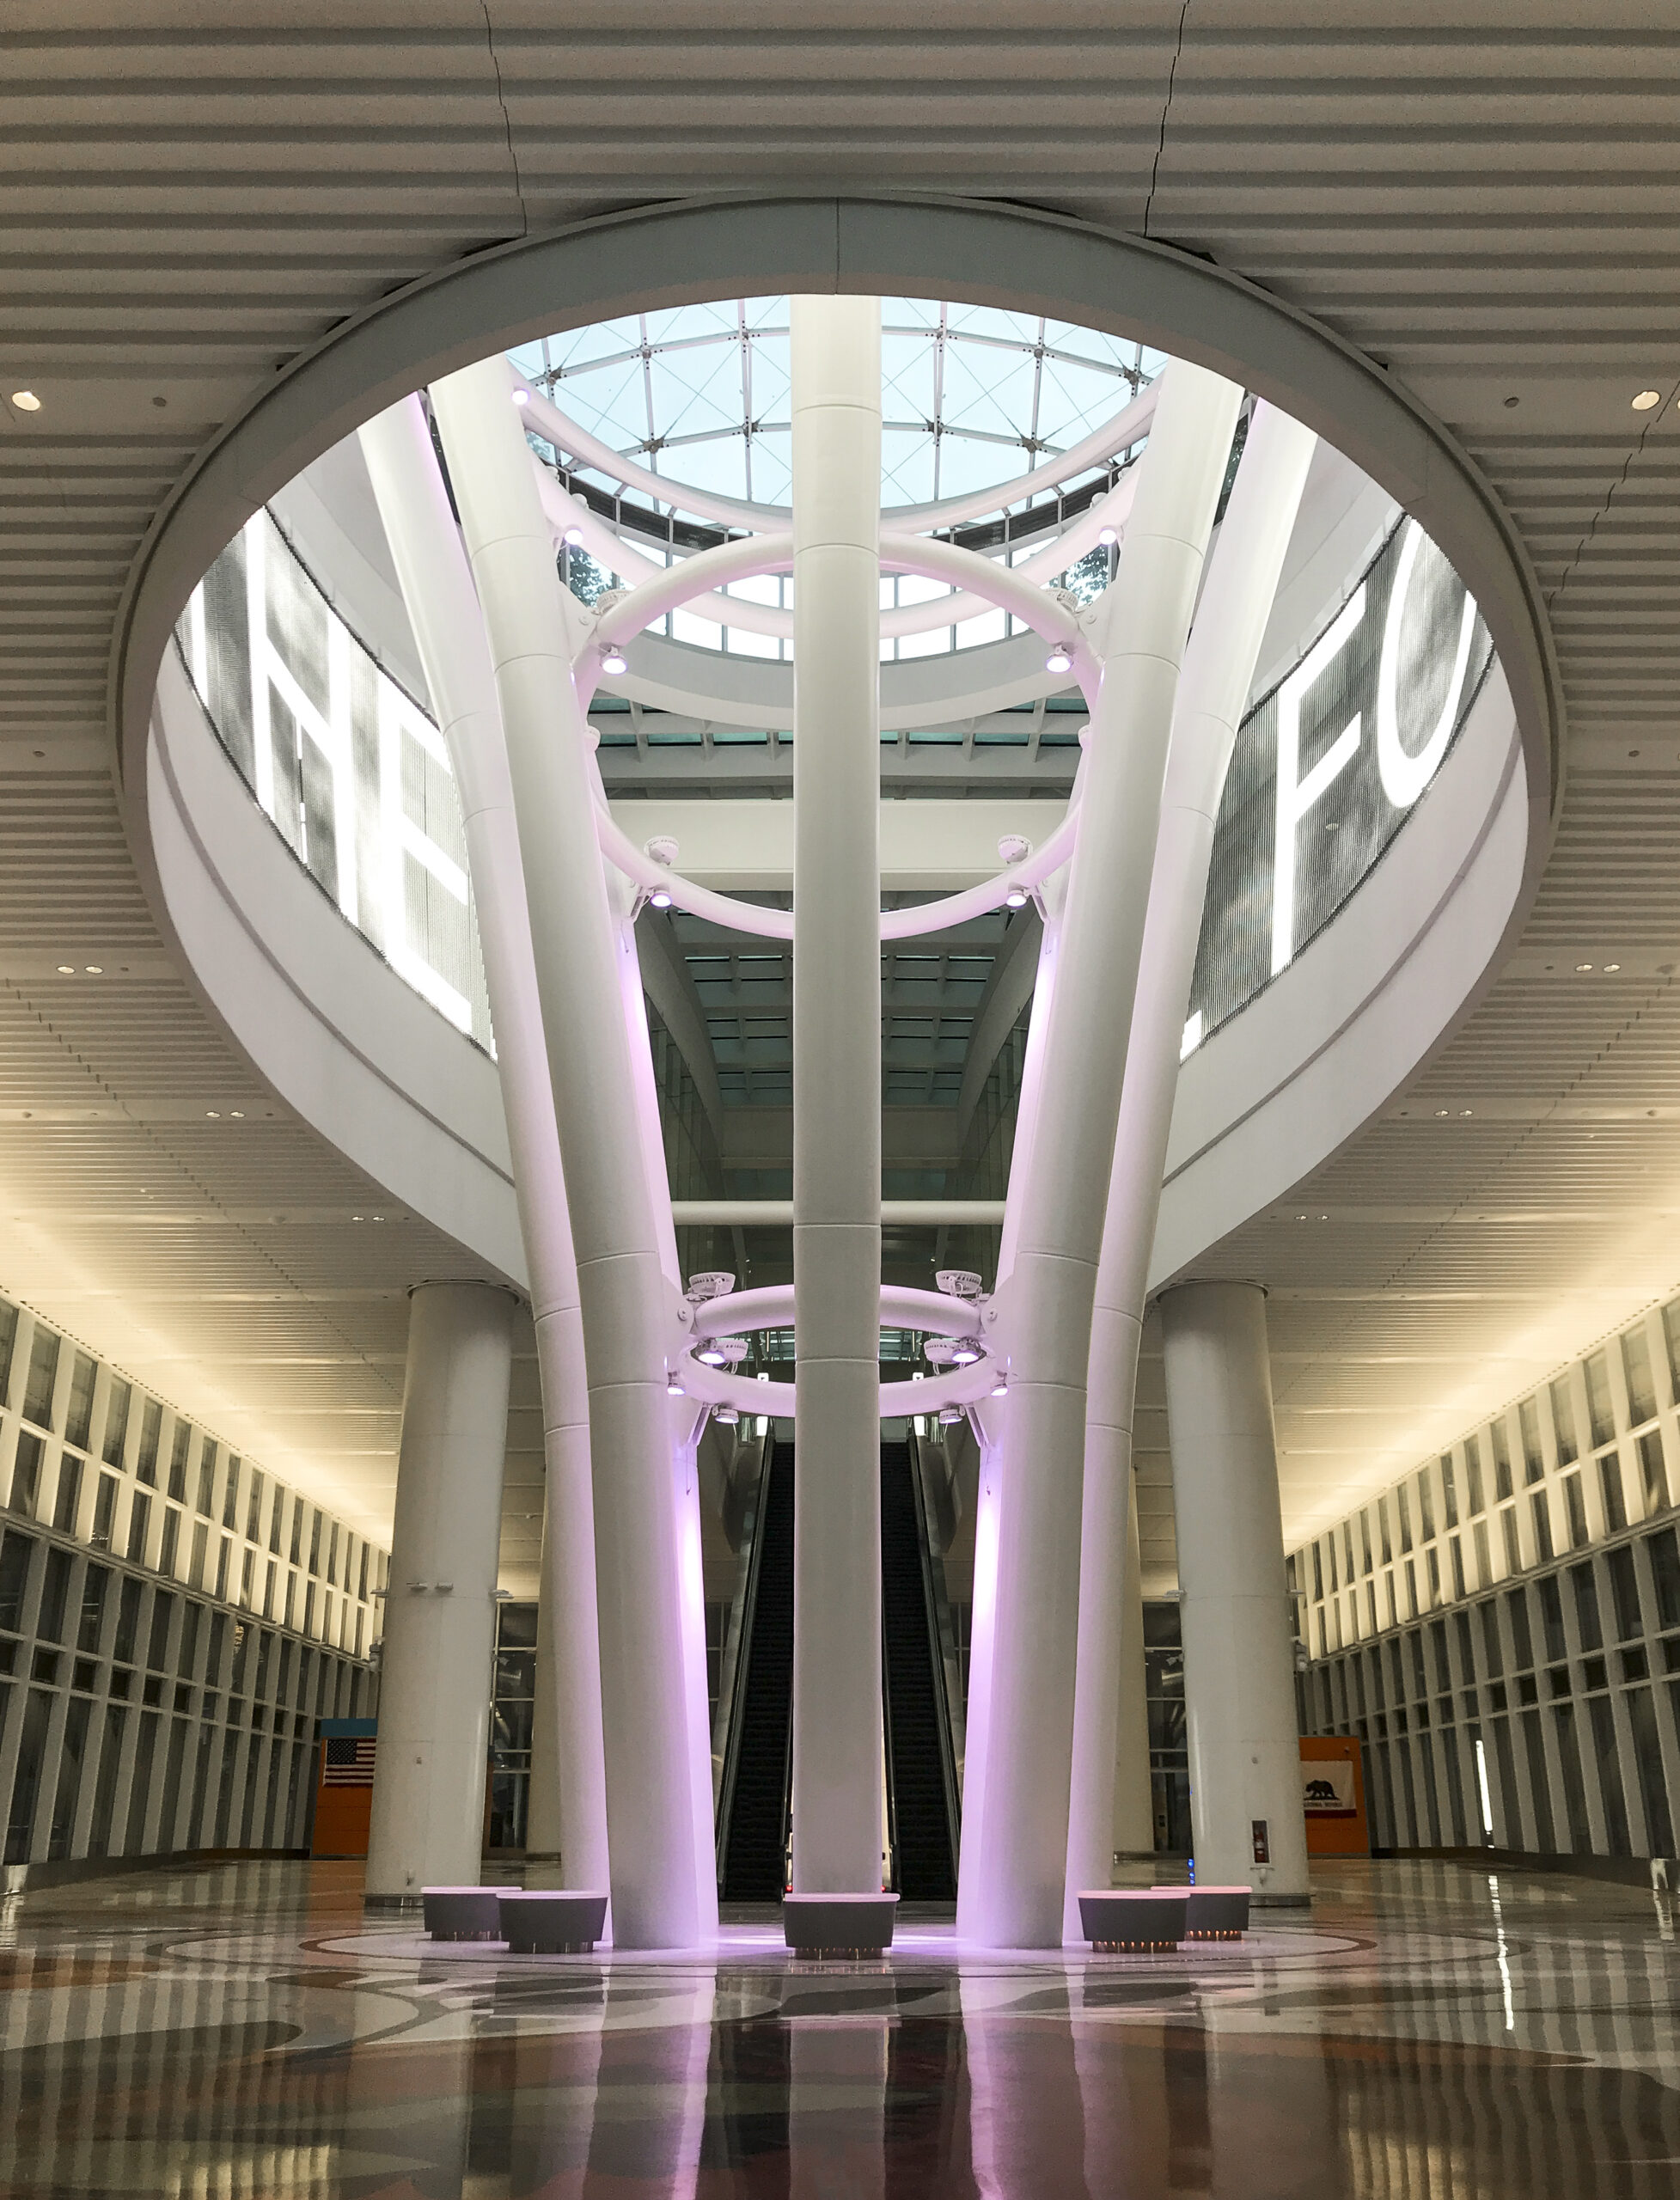 The Light Column extends from the roof deck to two stories below grade and is illuminated with a different color every hour. Salesforce Transit Center (Phase One), San Francisco, California © Apeiro Design